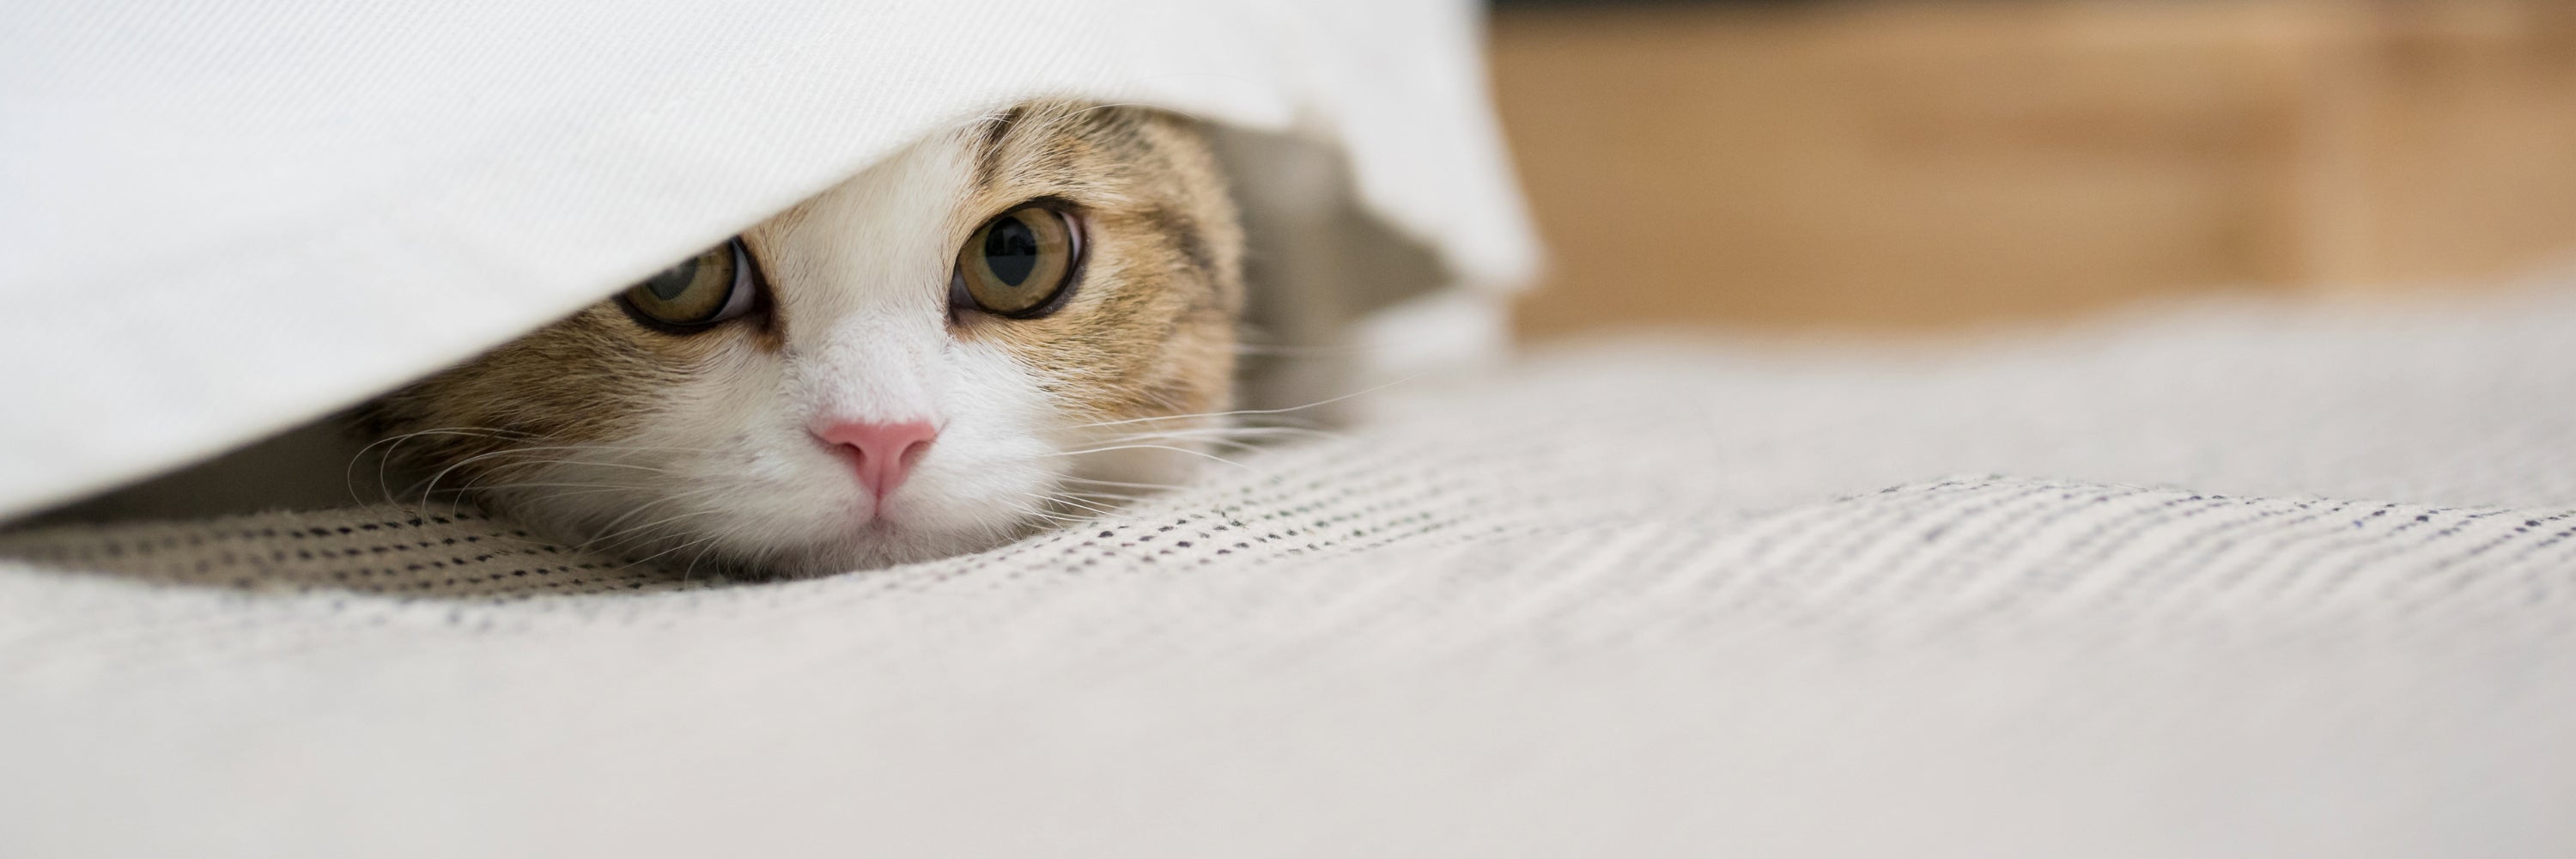 Cat hiding under a blanket. Holistic Cat Care - All Products	Natural Flea and Tick Prevention for Cats, Supplement for Cats